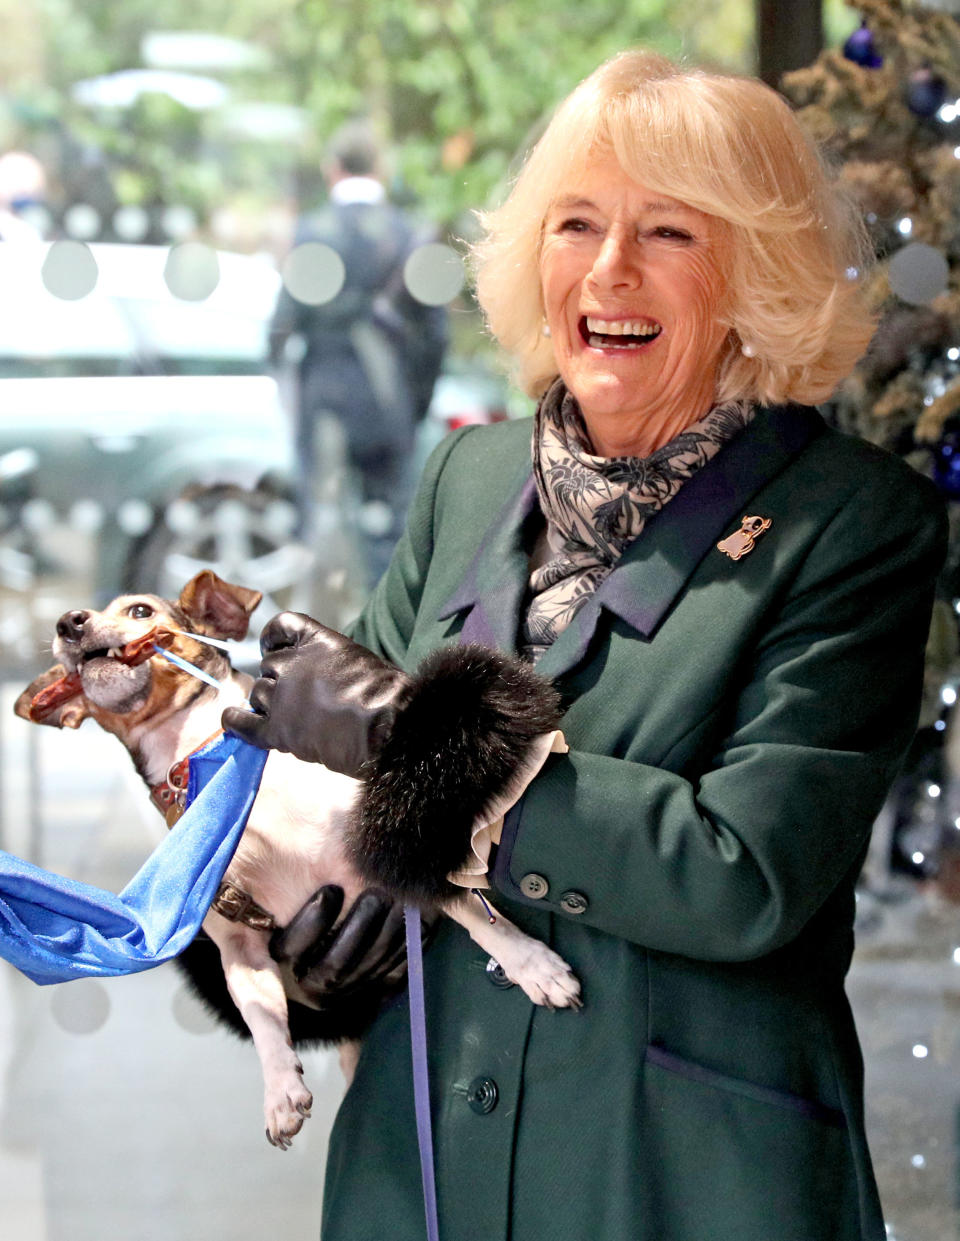 WINDSOR, ENGLAND - DECEMBER 09: Camilla, Duchess of Cornwall with Beth, her jack-russell terrier, unveiling a plaque as they visit the Battersea Dogs and Cats Home to open the new kennels and thank the centre's staff and supporters on December 9, 2020 in Windsor, United Kingdom. (Photo by Steve Parsons - WPA Pool/Getty Images)